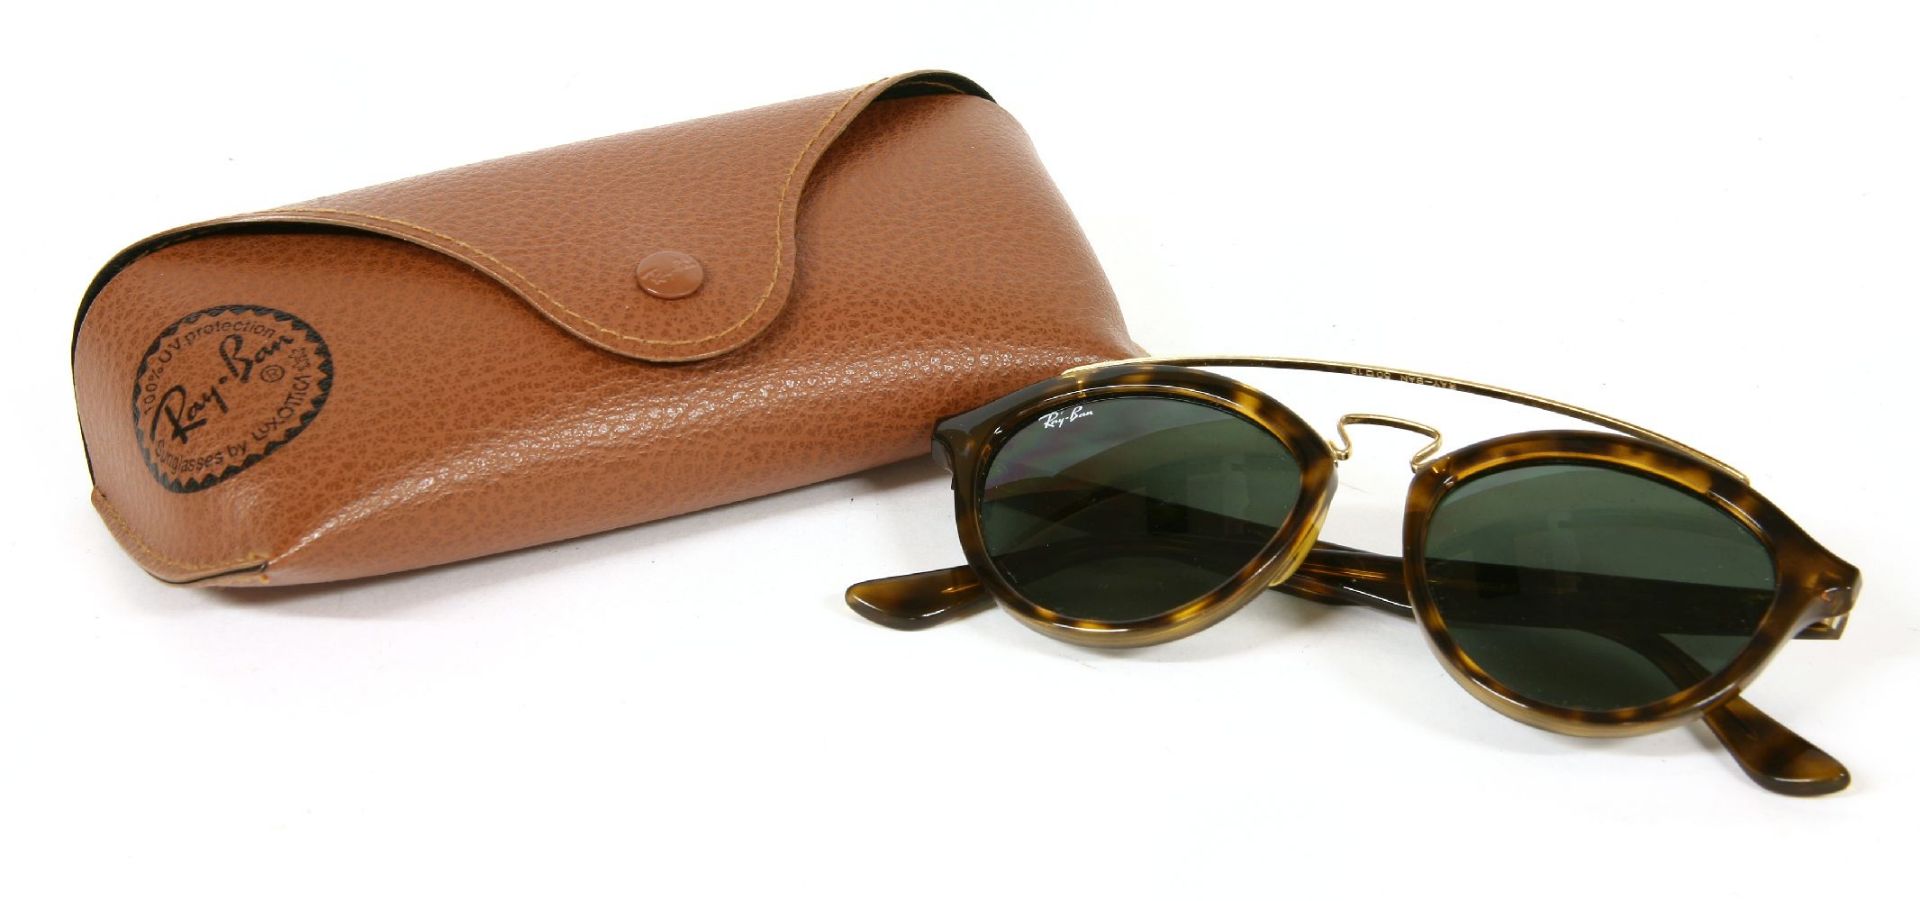 A pair or Ray-Ban 'Gatsby' sunglasses,tortoiseshell frames, with gold-tone crossbar and black tinted